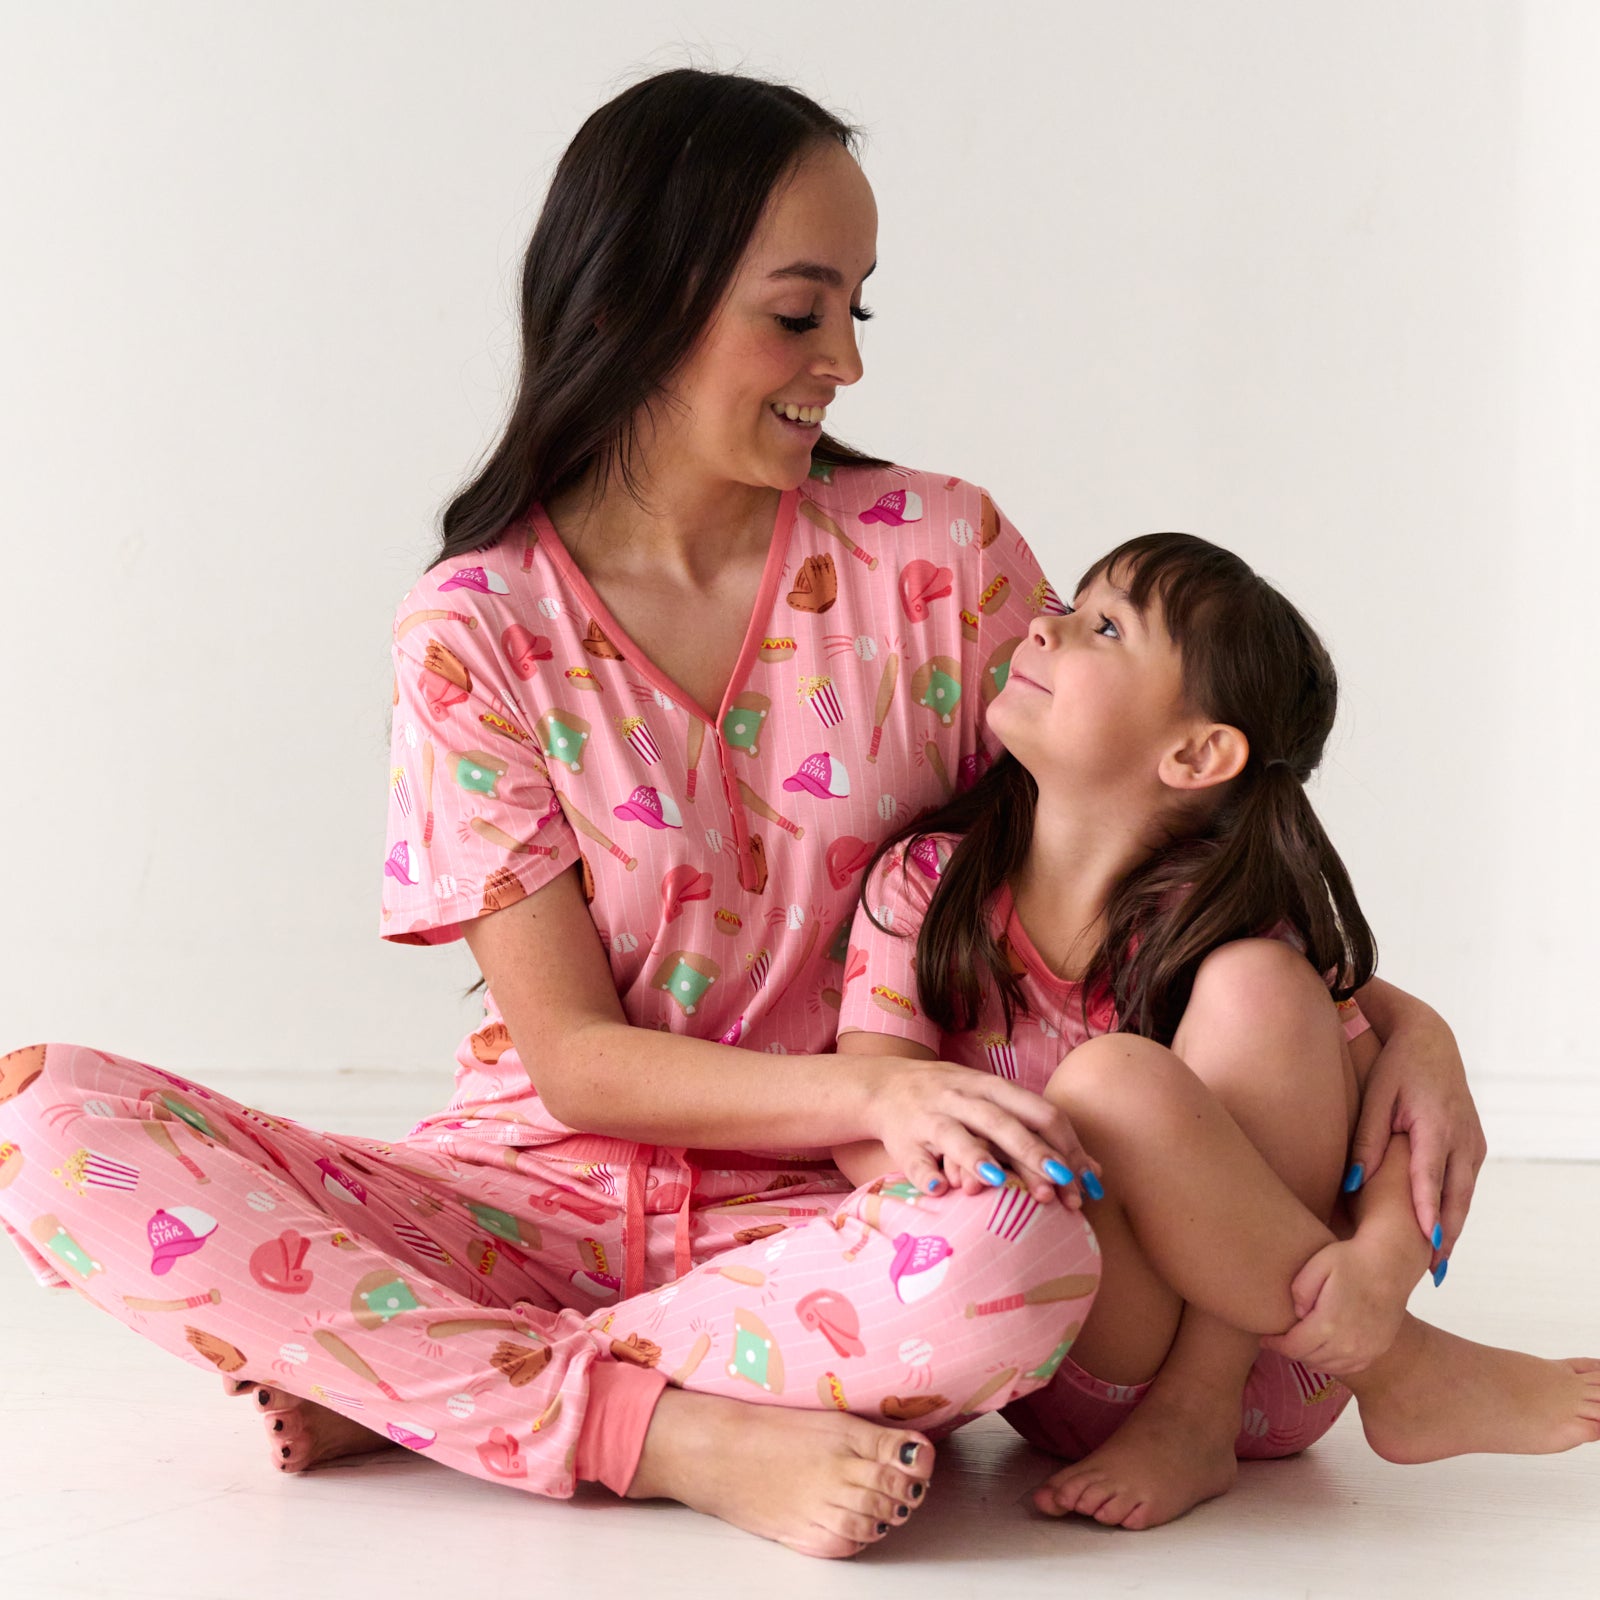 Mother and child sitting together wearing matching Pink All Stars pajamas. Mom is wearing women's Pink All Stars pajama top an matching pajama pants. Child is matching wearing a two Pink All Stars two piece short sleeve and shorts pajama set